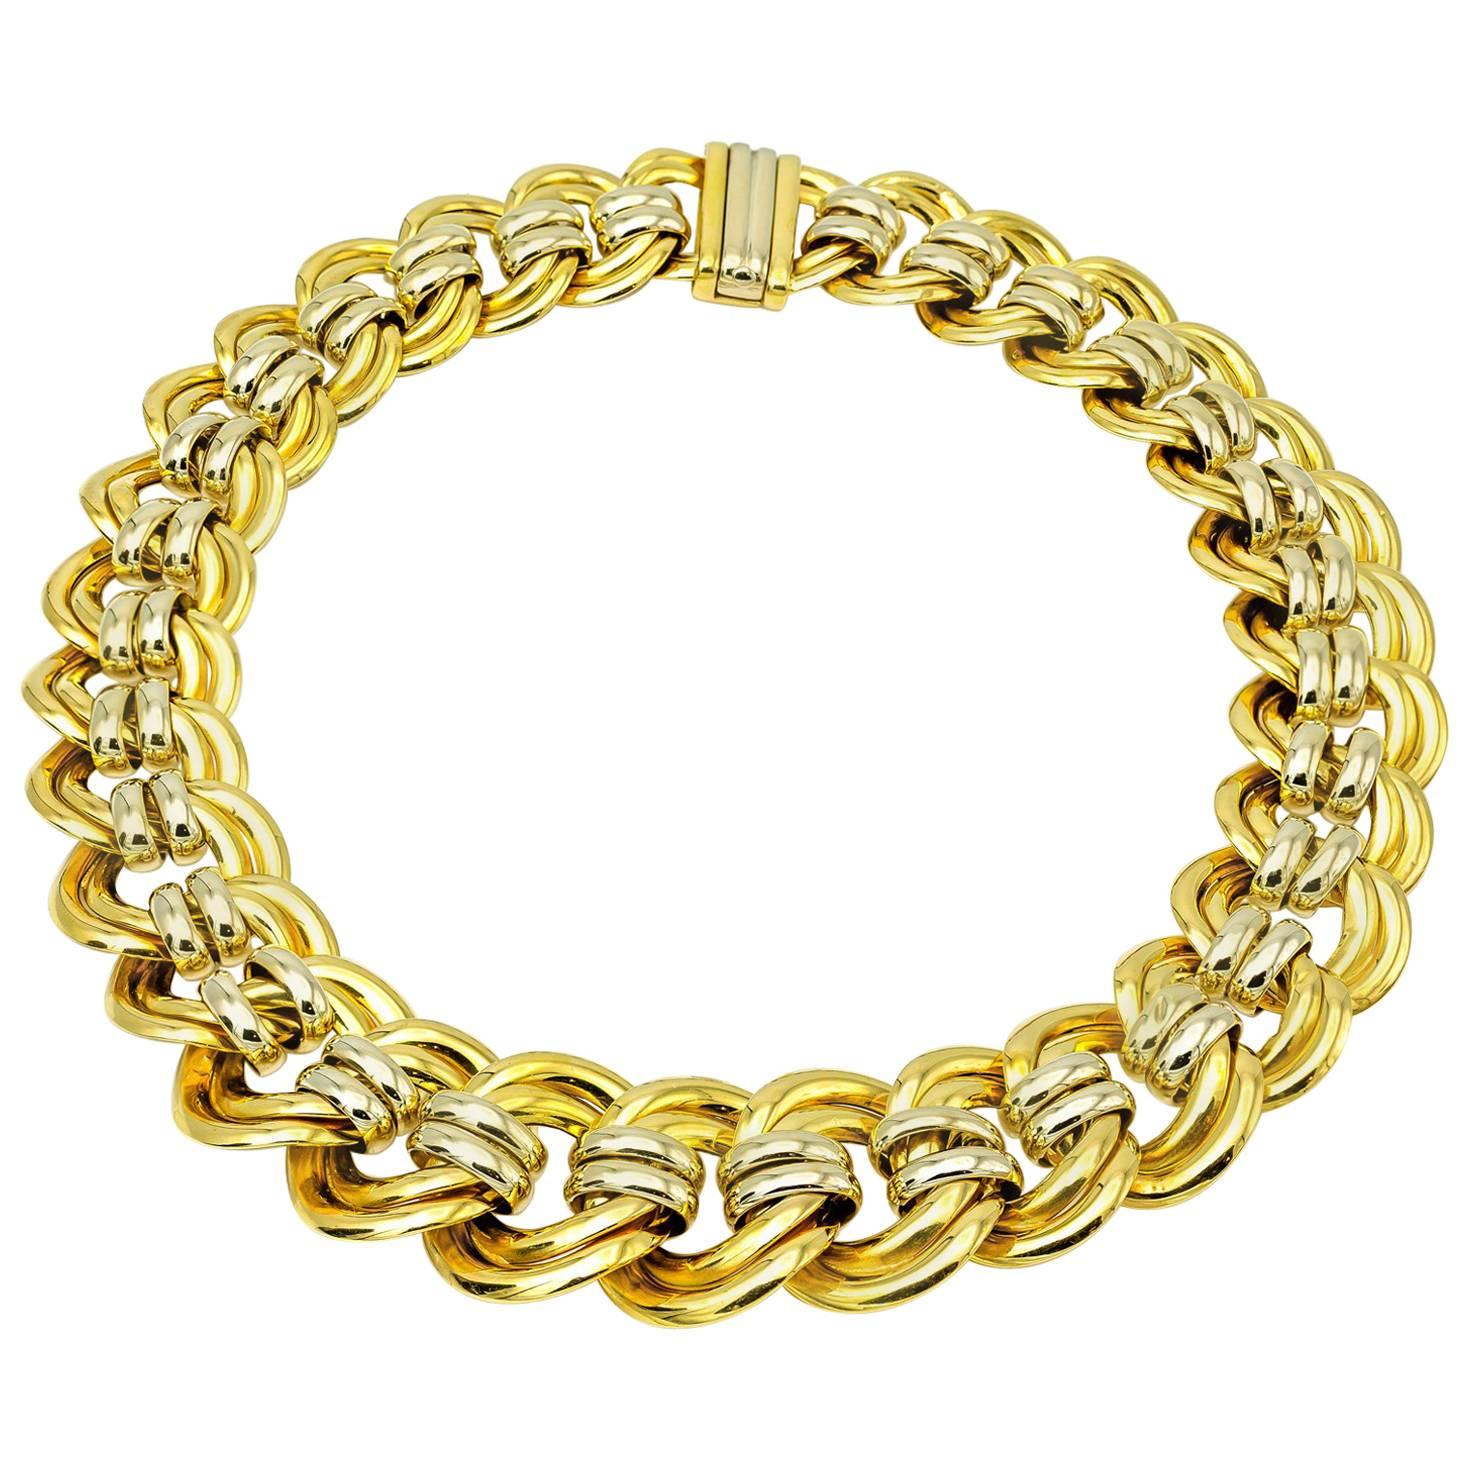 Large Gold Chain Link Choker Necklace